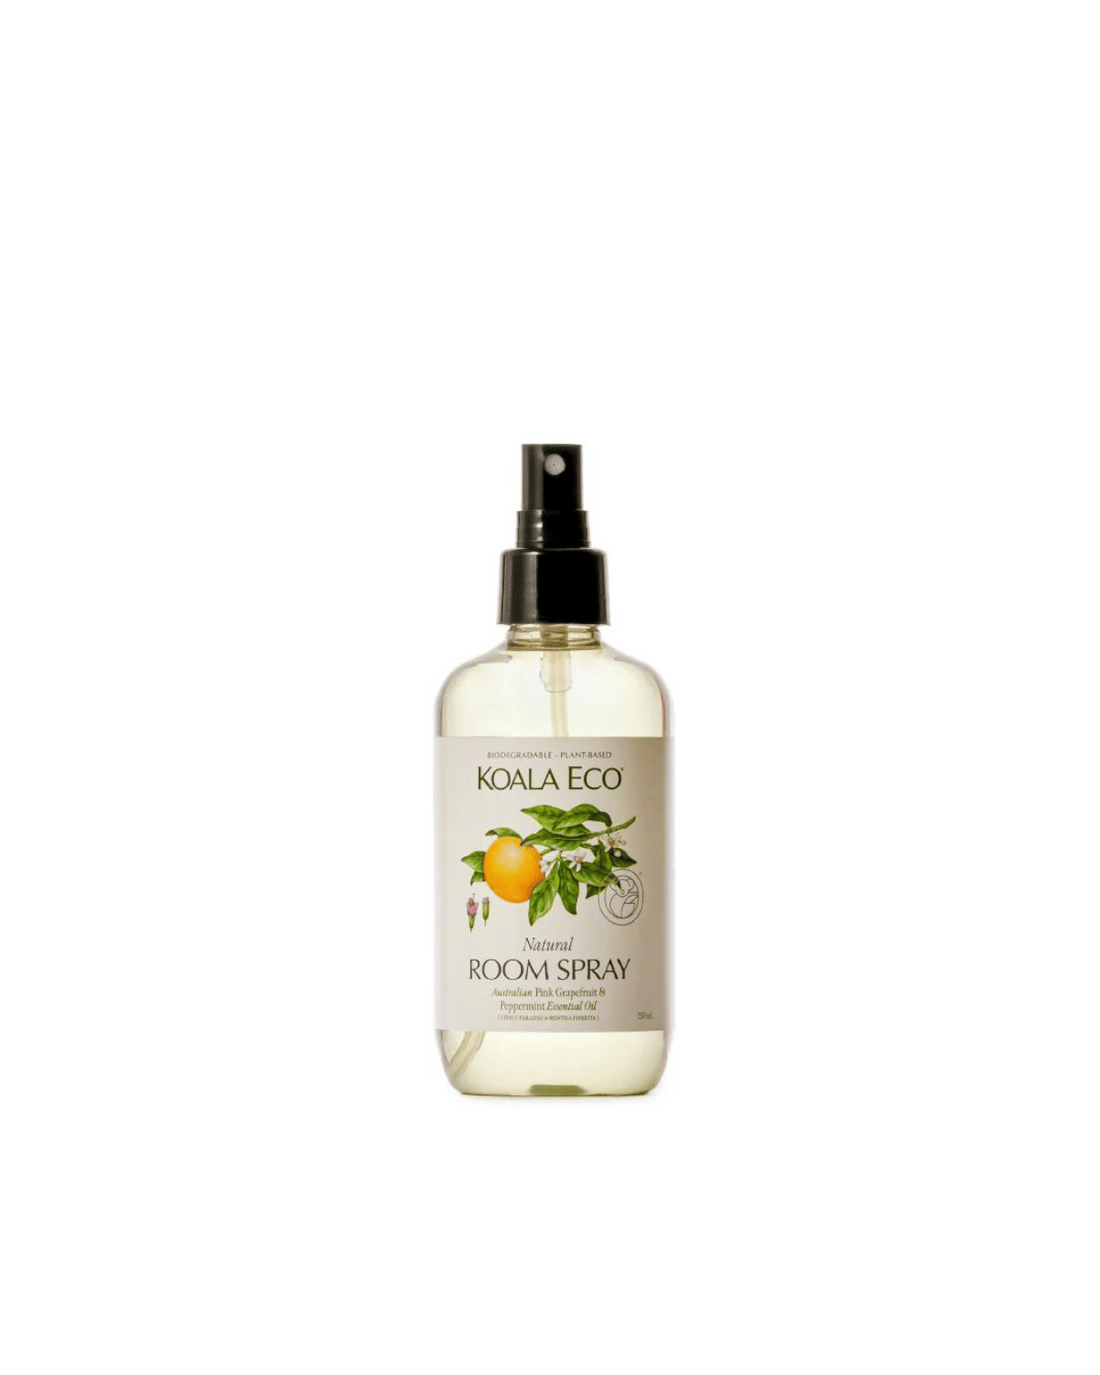 Natural Room Spray by Koala Eco - Pink Grapefruit and Peppermint (250ml)